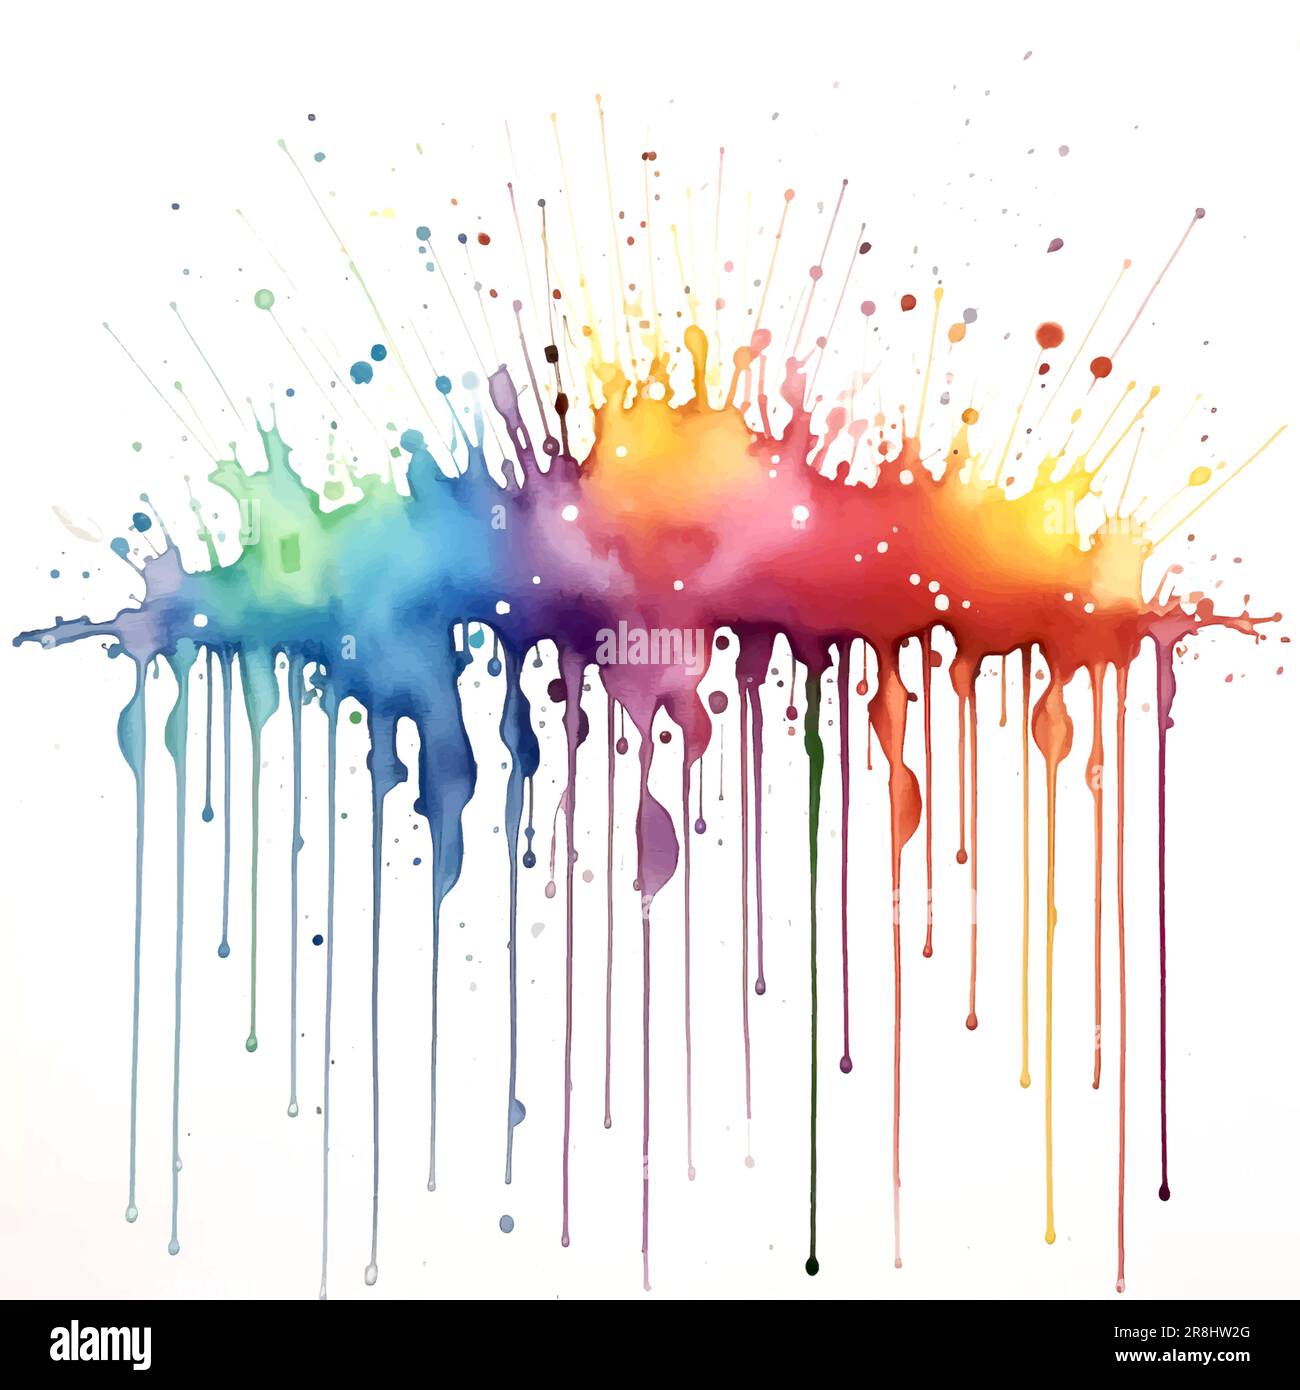 Dripping paint rainbow background abstract Vector Image